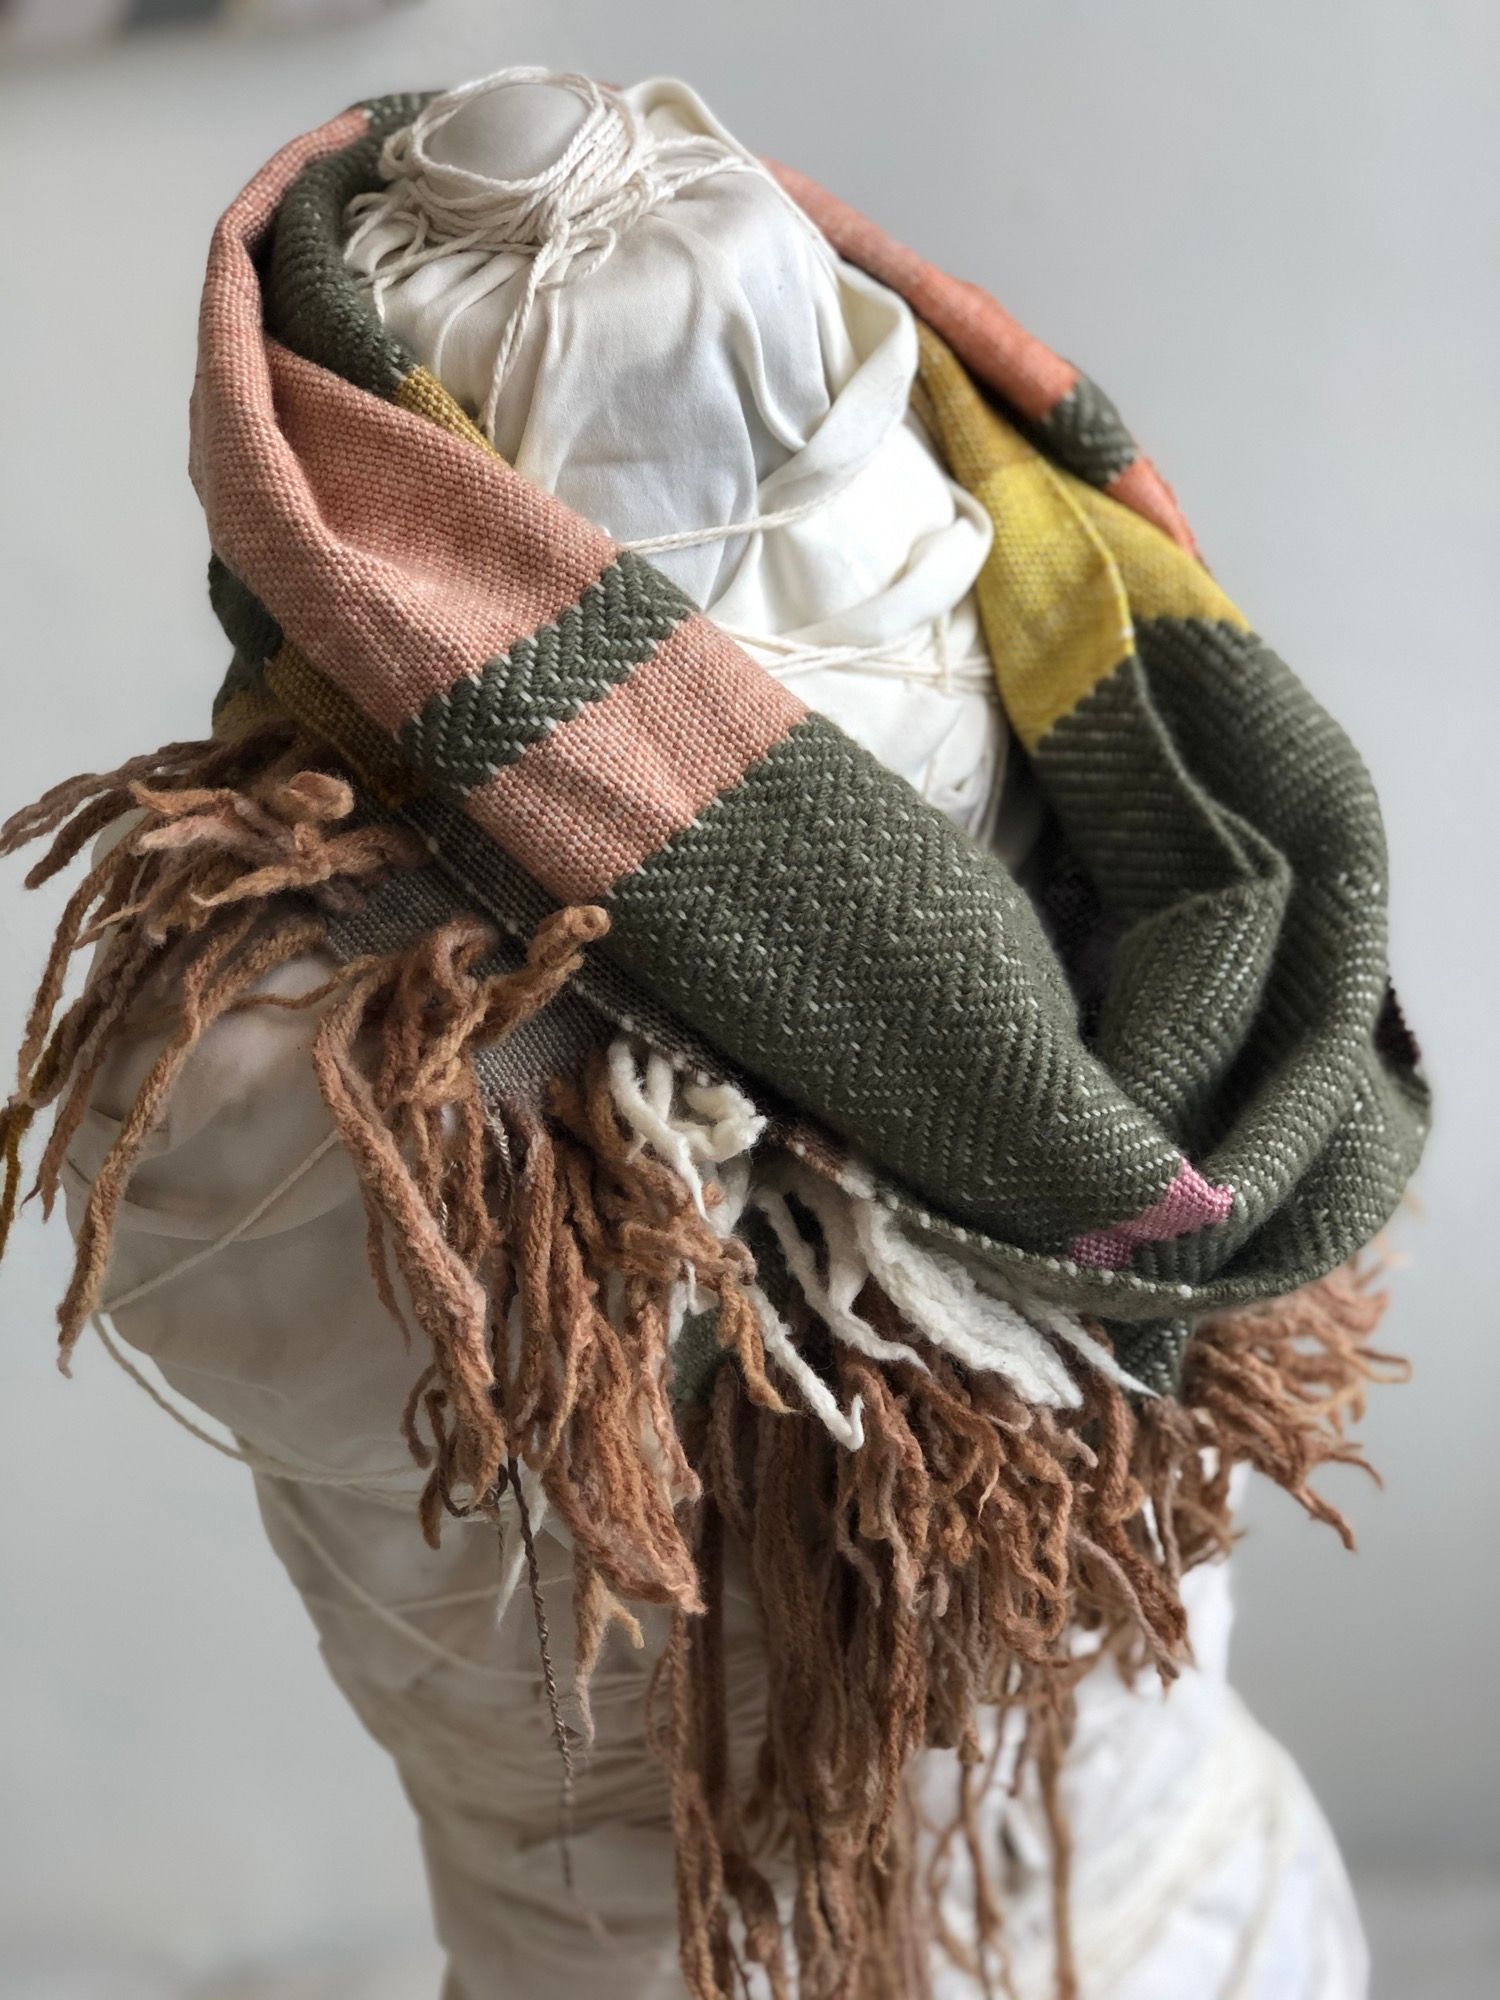 peach, yellow, green, pink and brown handwoven textured cowl scarf on a white mannequin in a white room